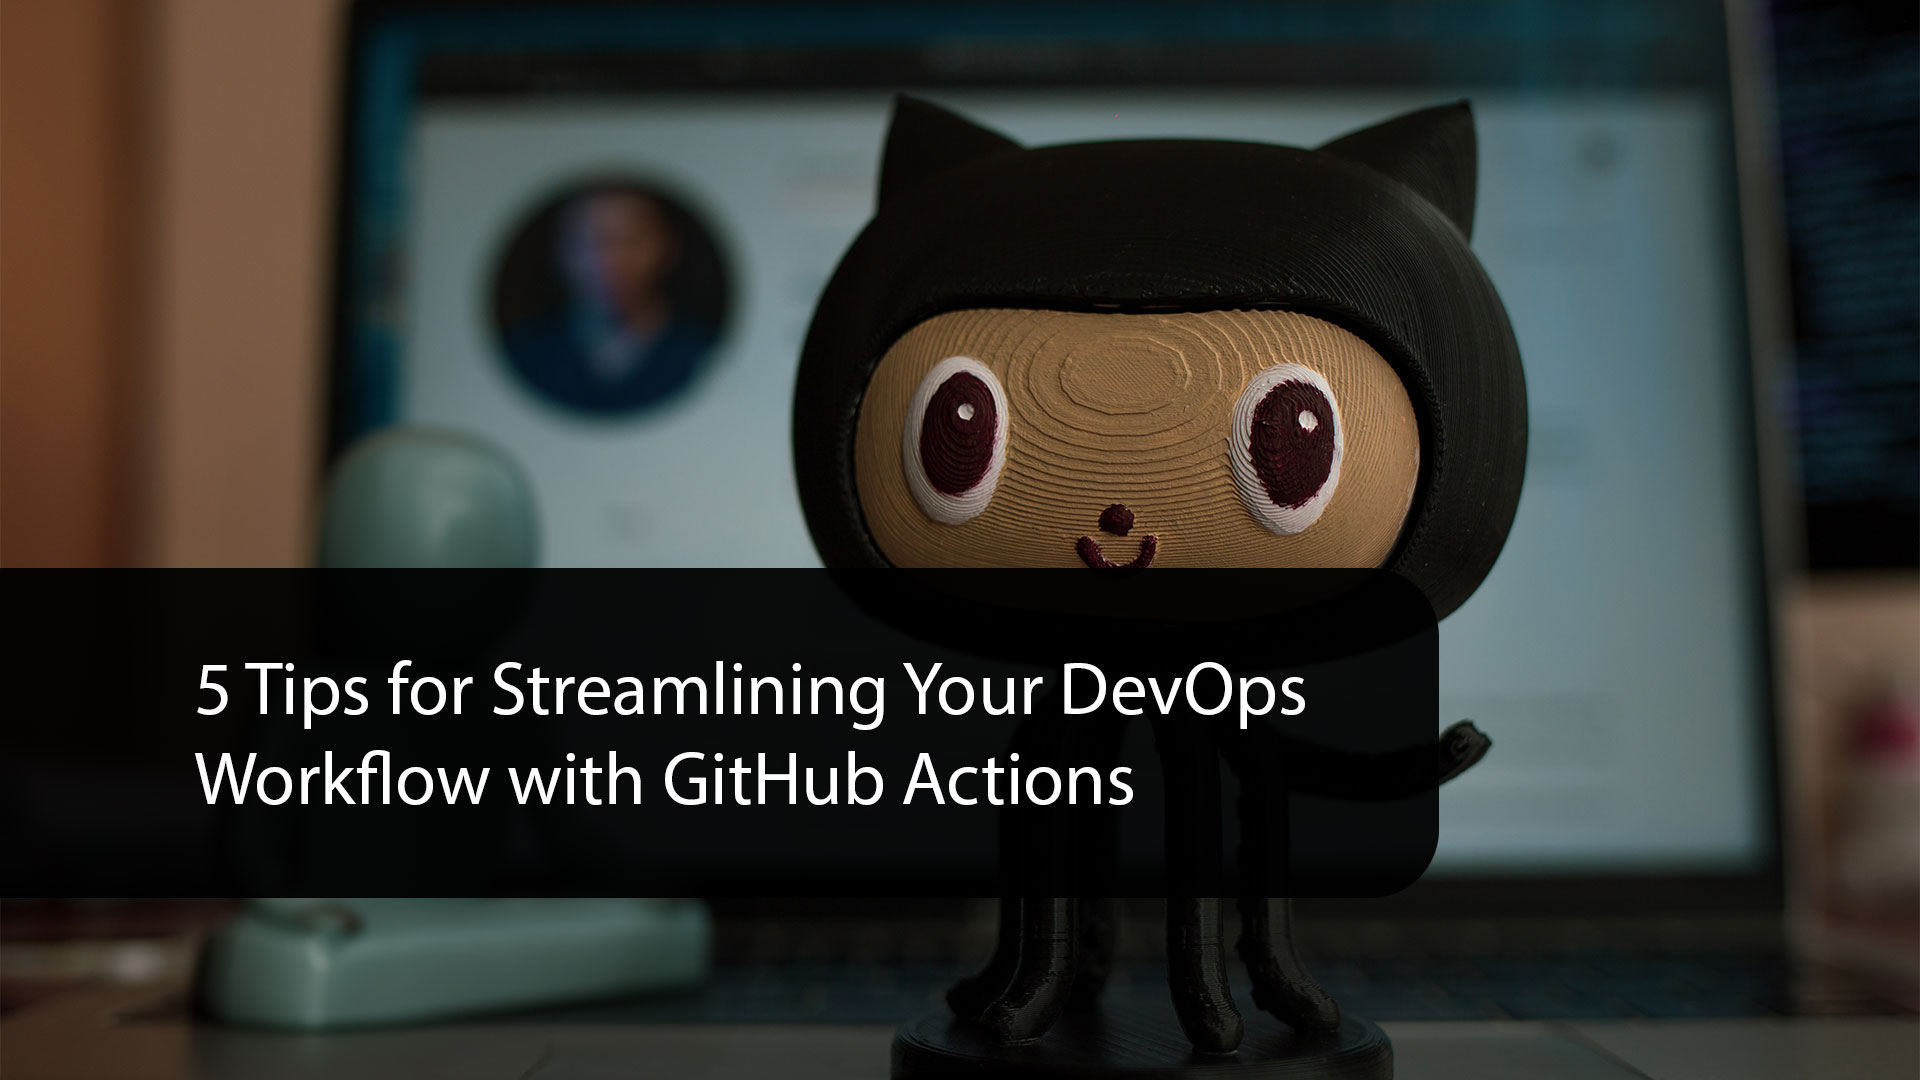 5 Tips for Streamlining Your DevOps Workflow with GitHub Actions